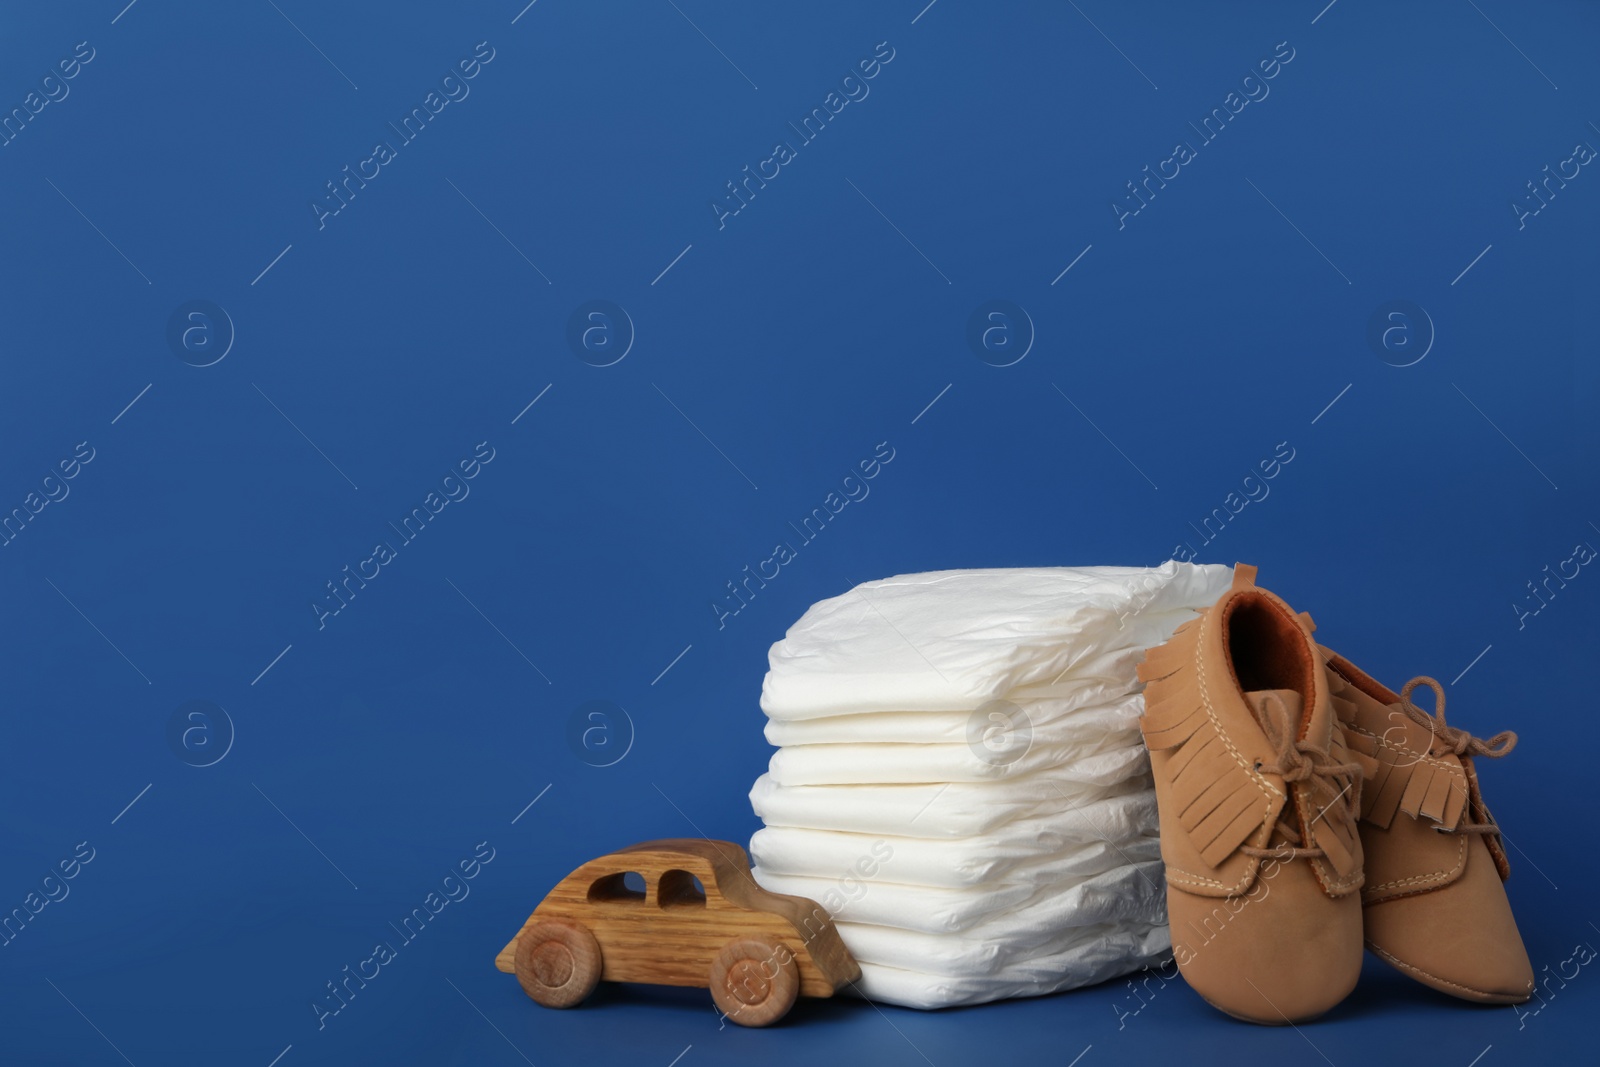 Photo of Diapers, baby accessories and toy car on blue background. Space for text